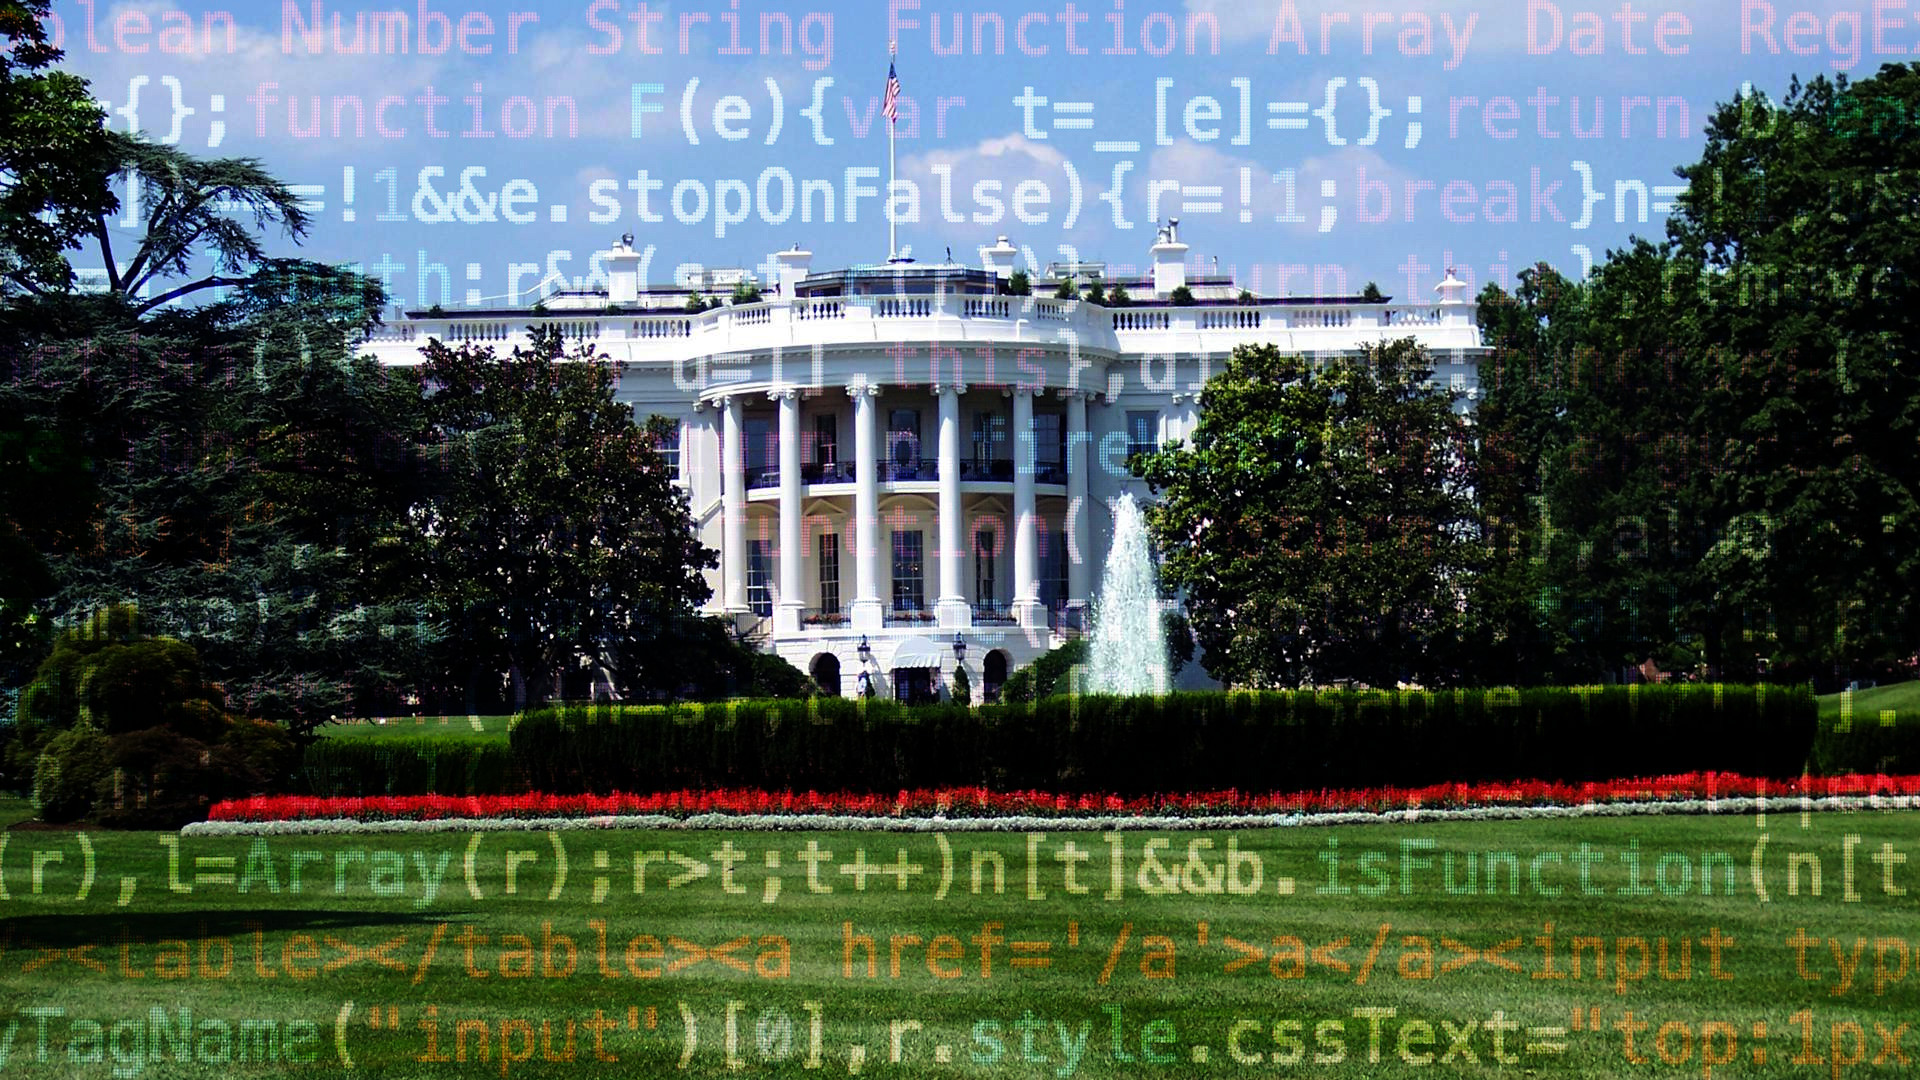 The US White House urged developers to avoid C and C++, to use 